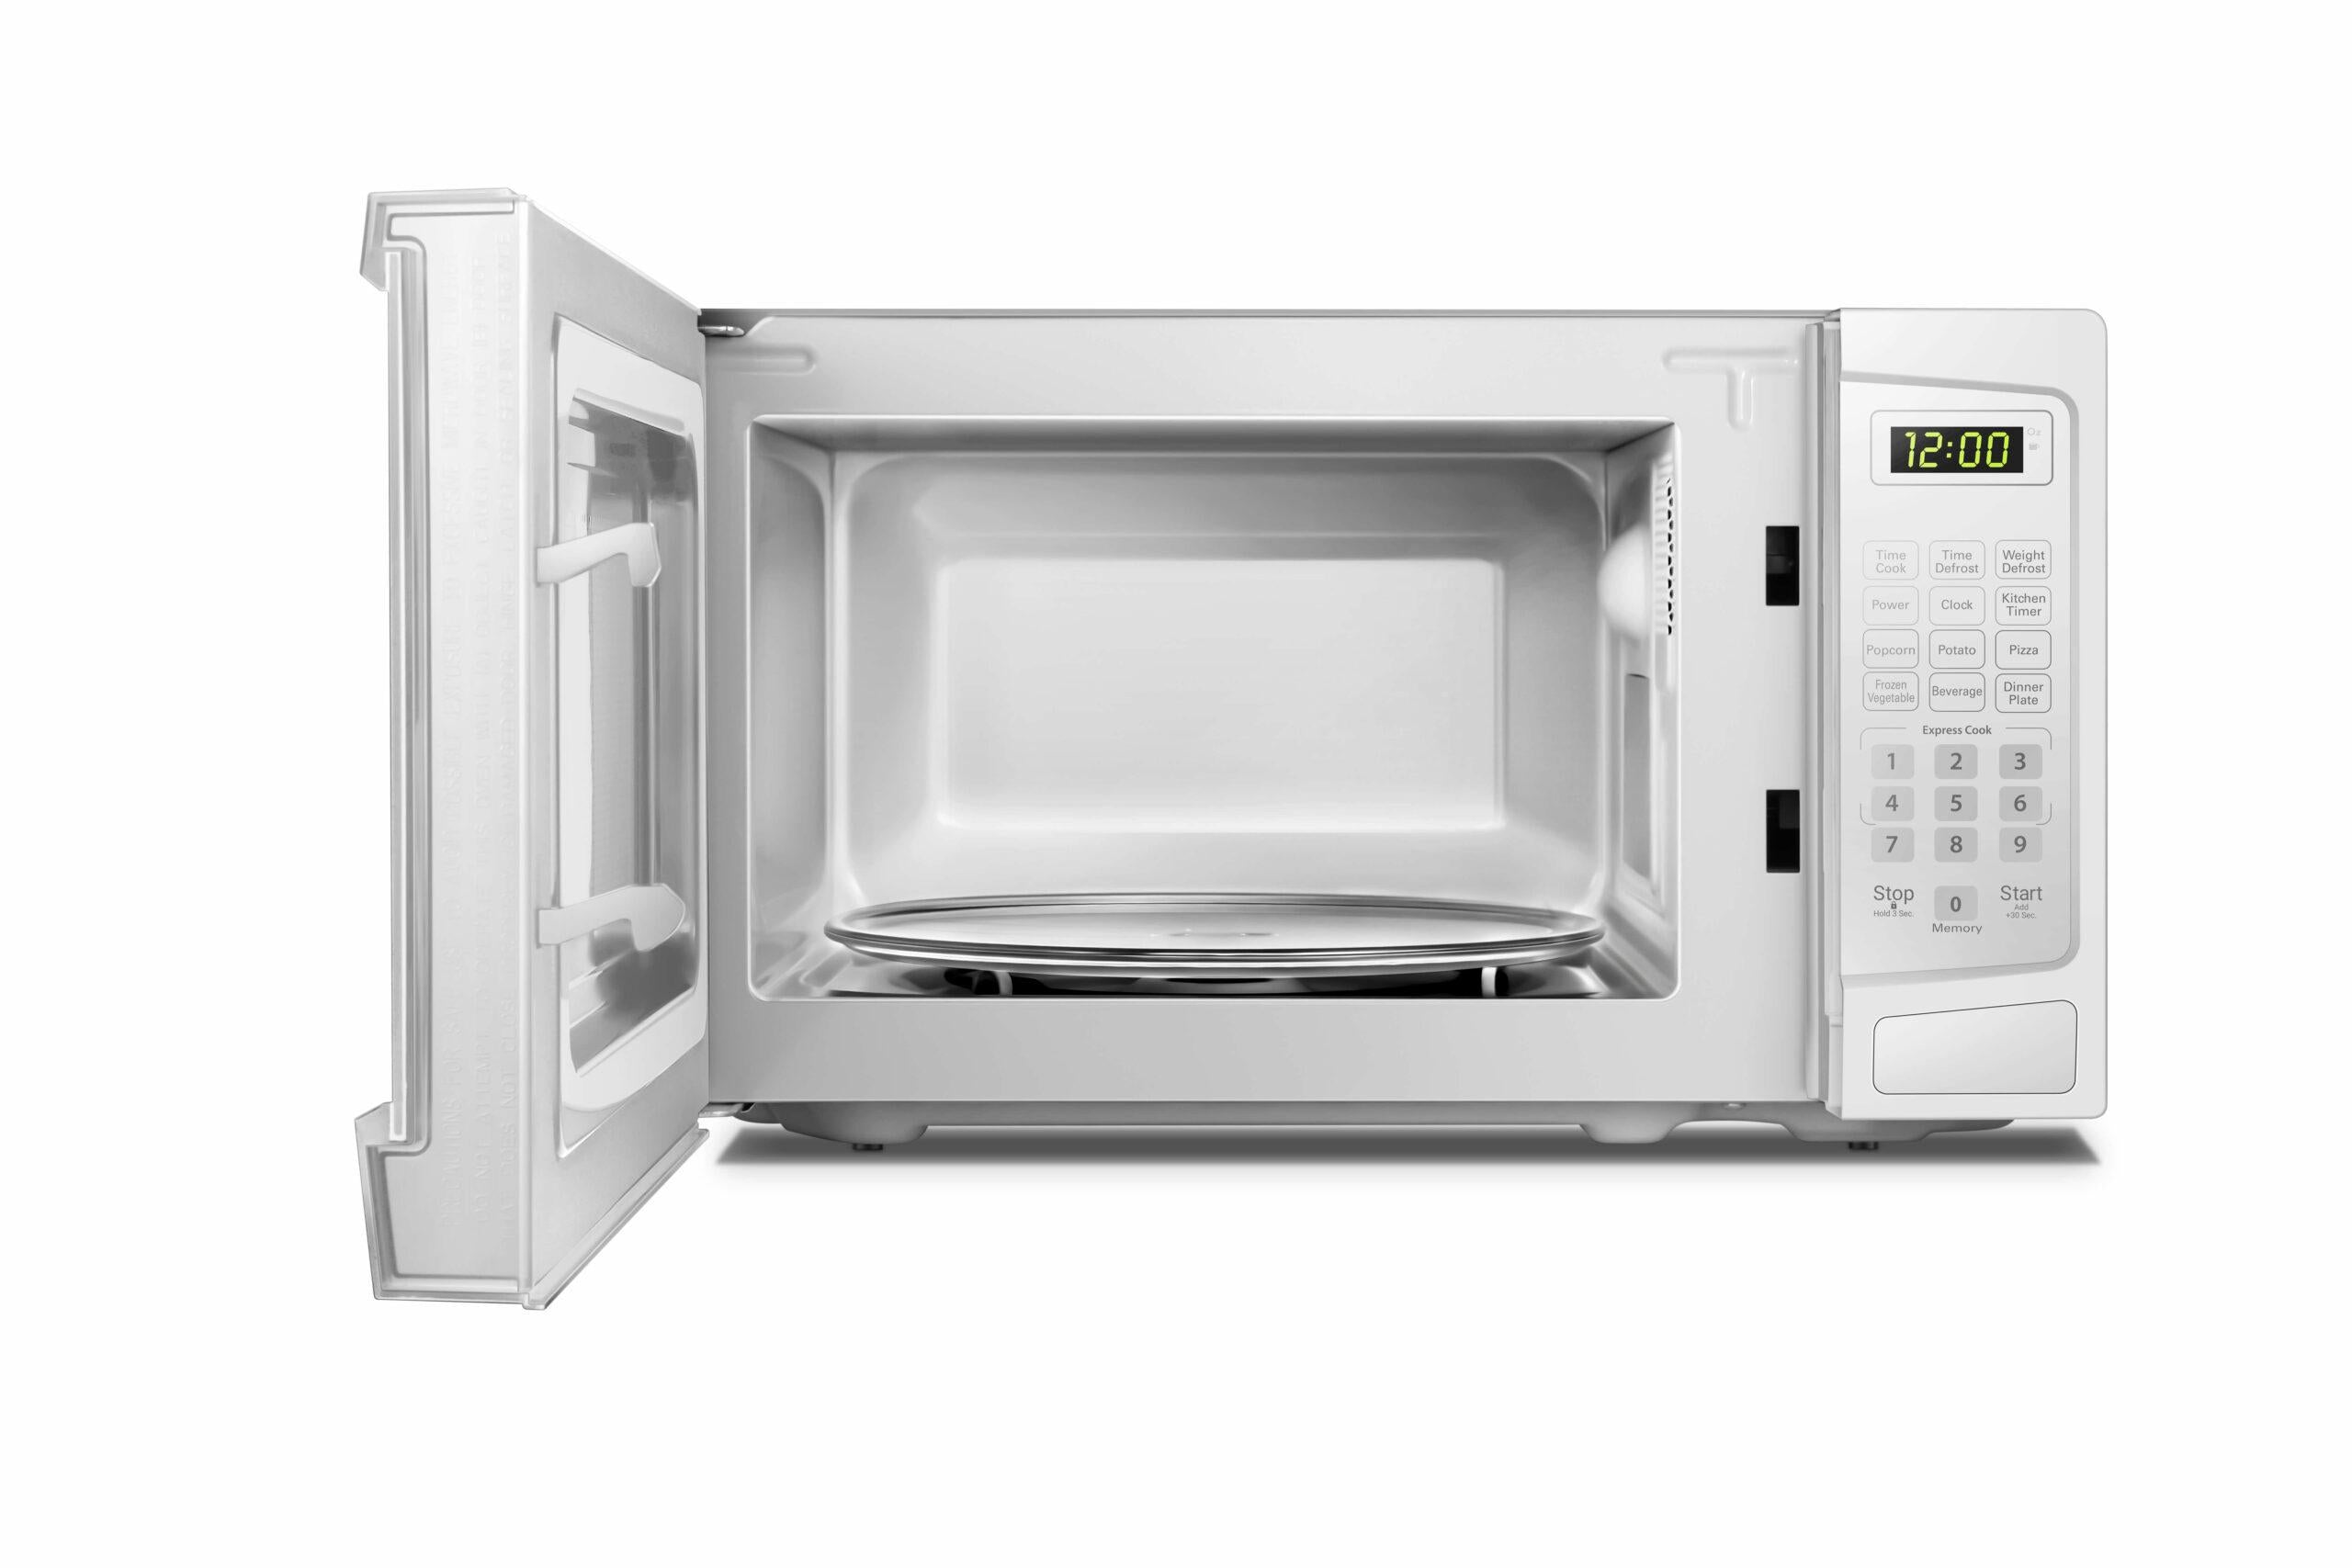 Danby 0.9 cu. ft. Countertop Microwave in White